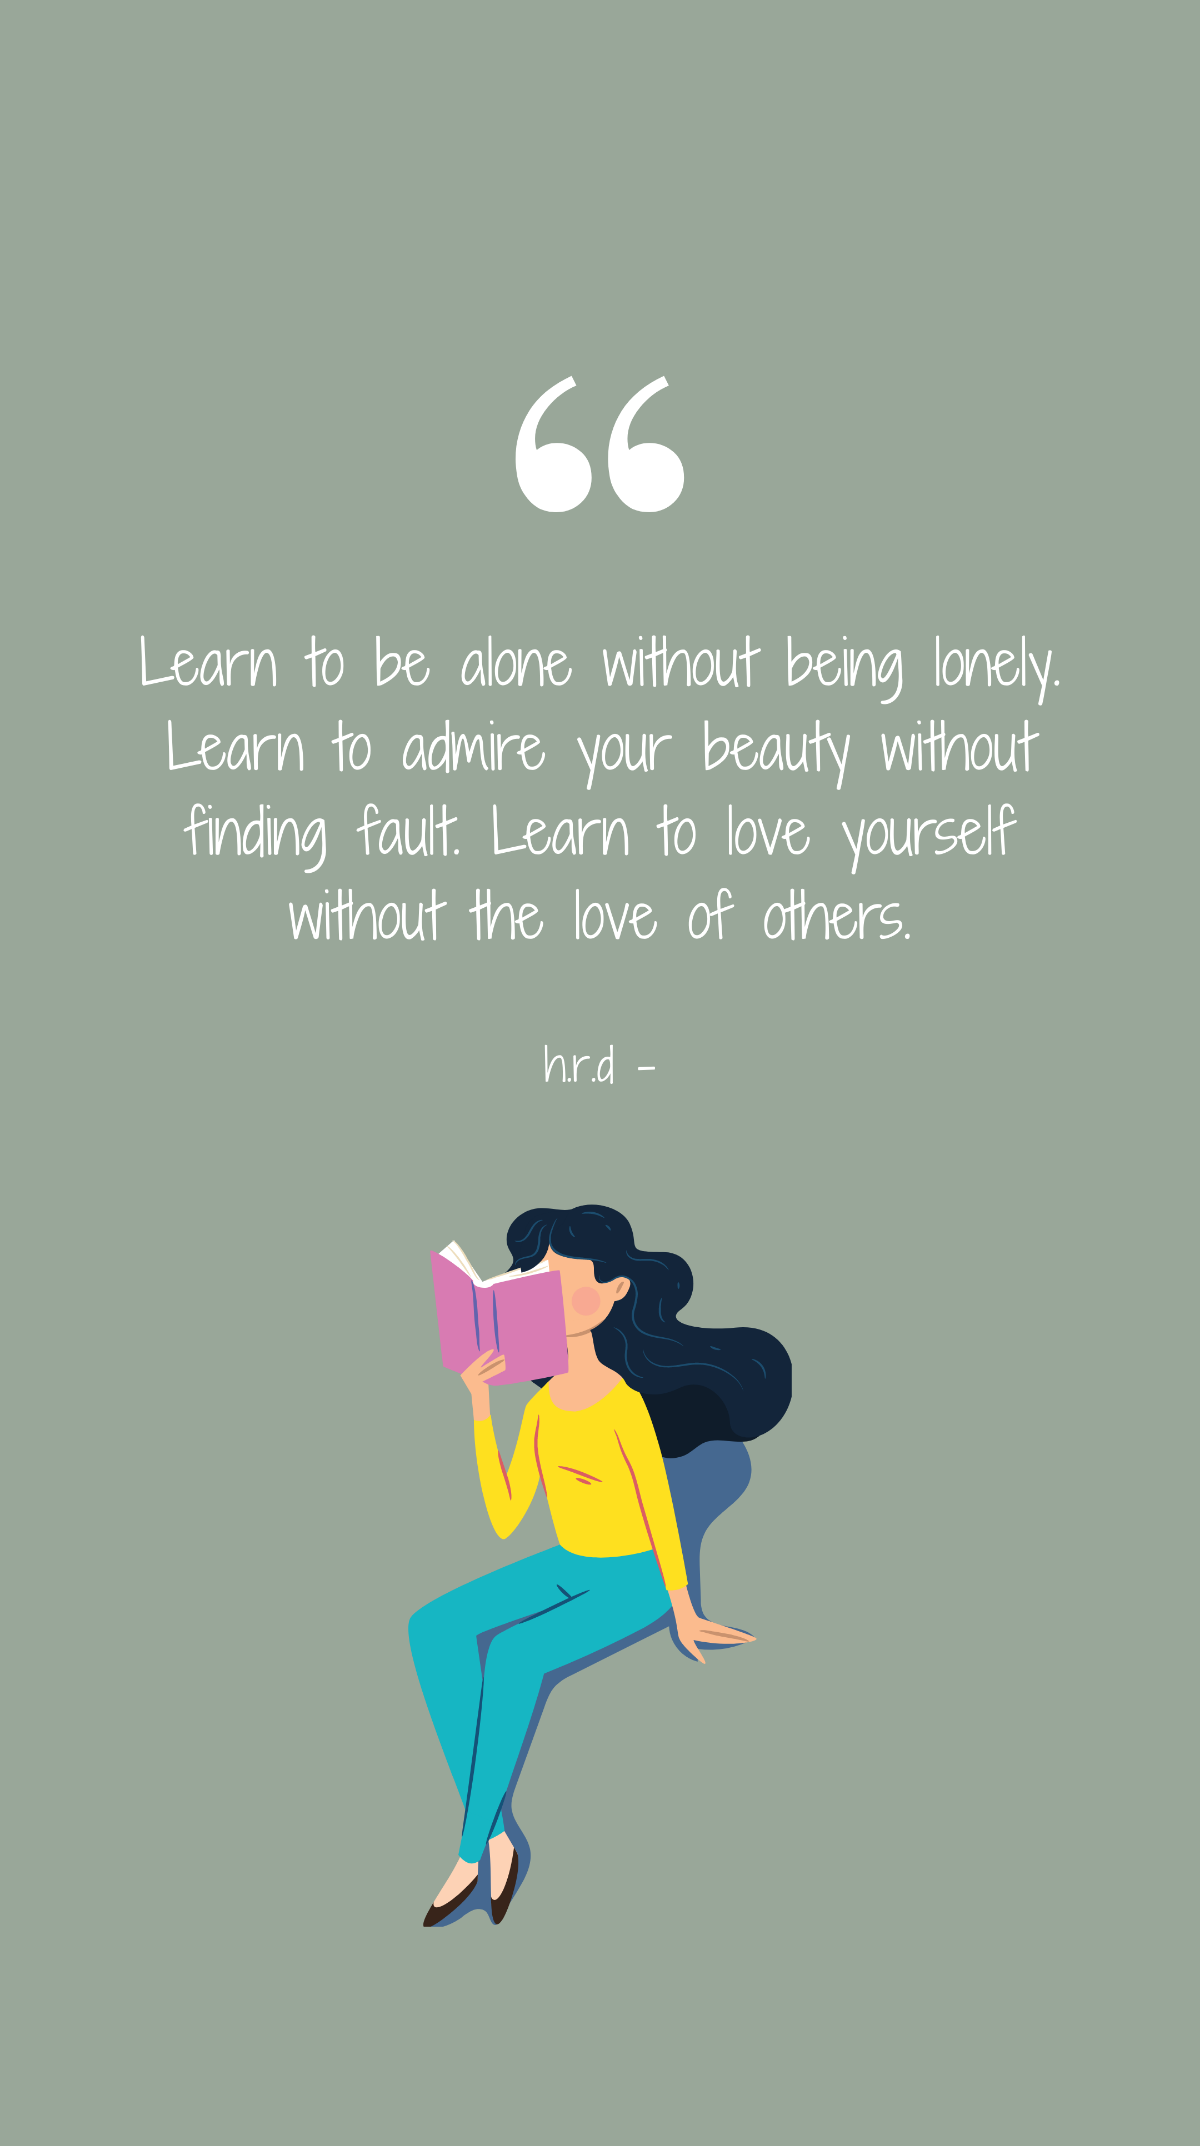 h.r.d - Learn to be alone without being lonely. Learn to admire your beauty without finding fault. Learn to love yourself without the love of others.